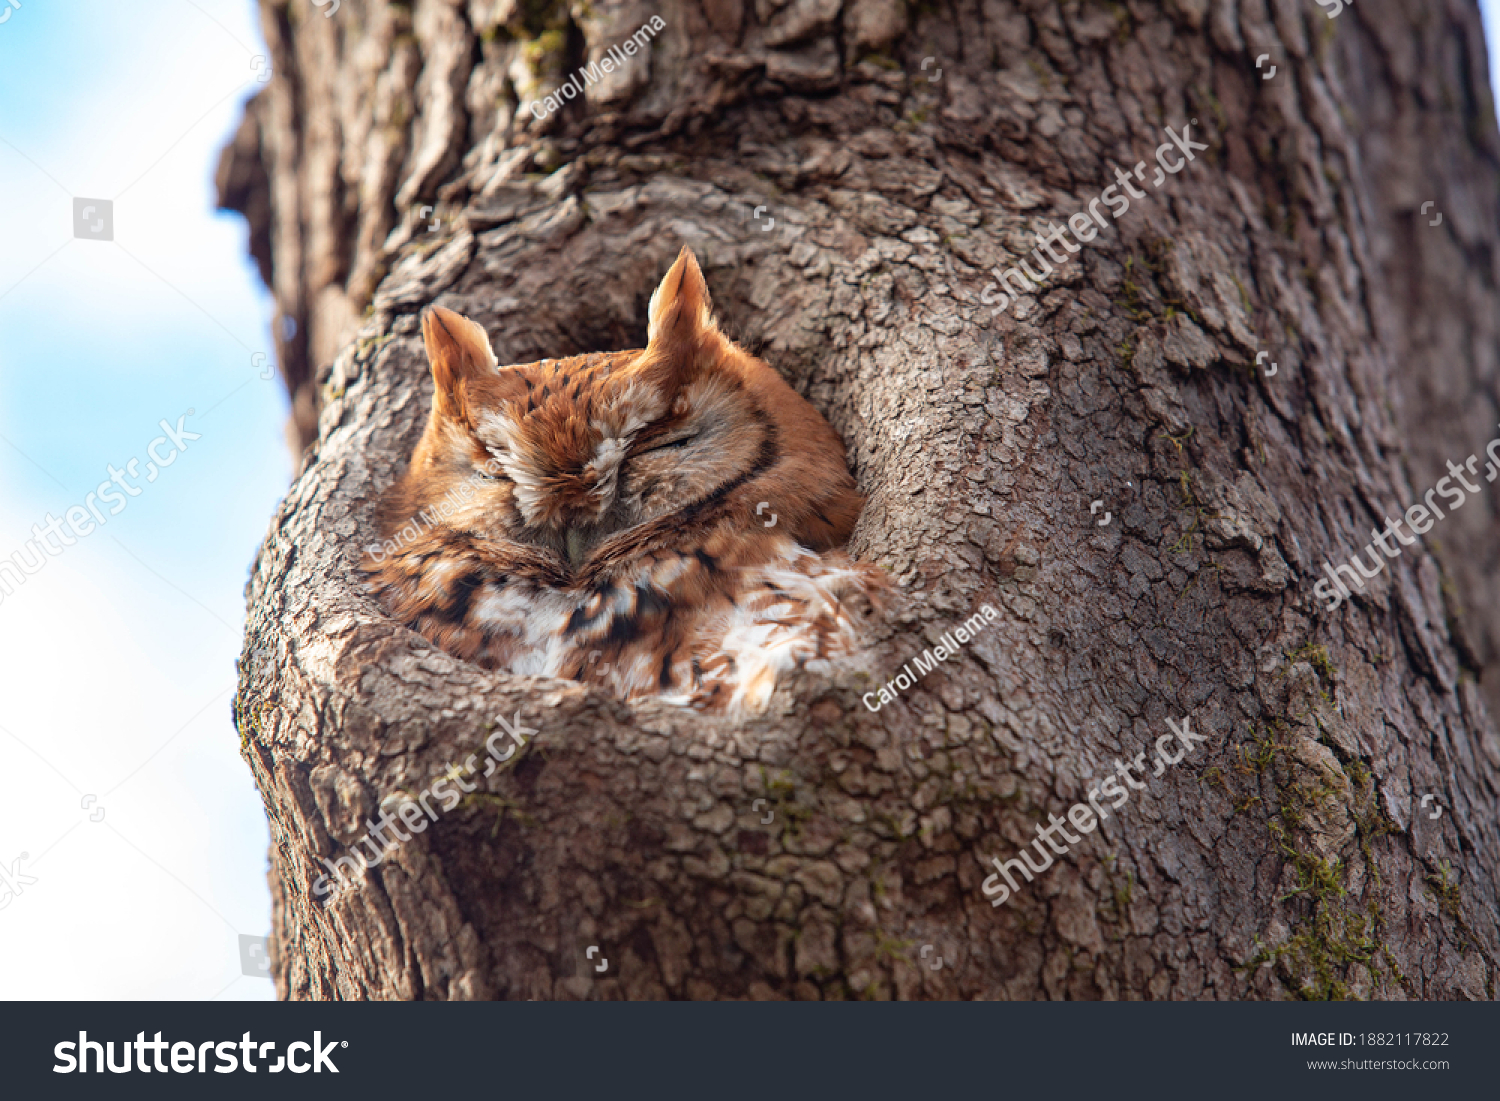 A red Eastern Screech Owl naps in a hole in a tree in Eastern Tennessee #1882117822